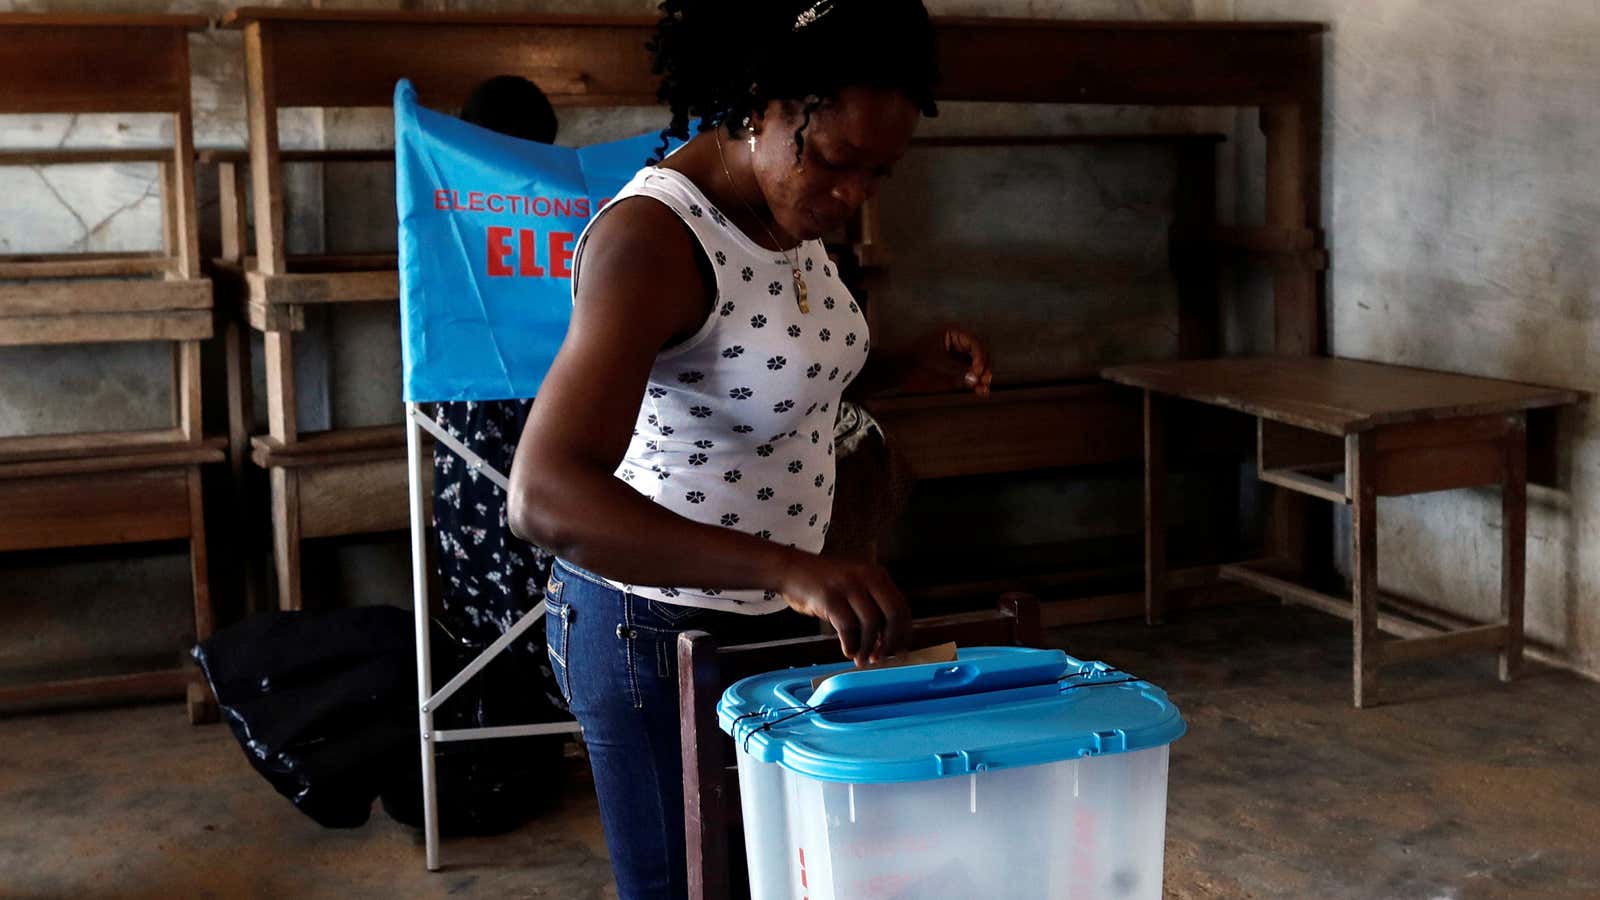 A woman casts her ballot at a polling station during the presidential election, in Yaounde, Cameroon